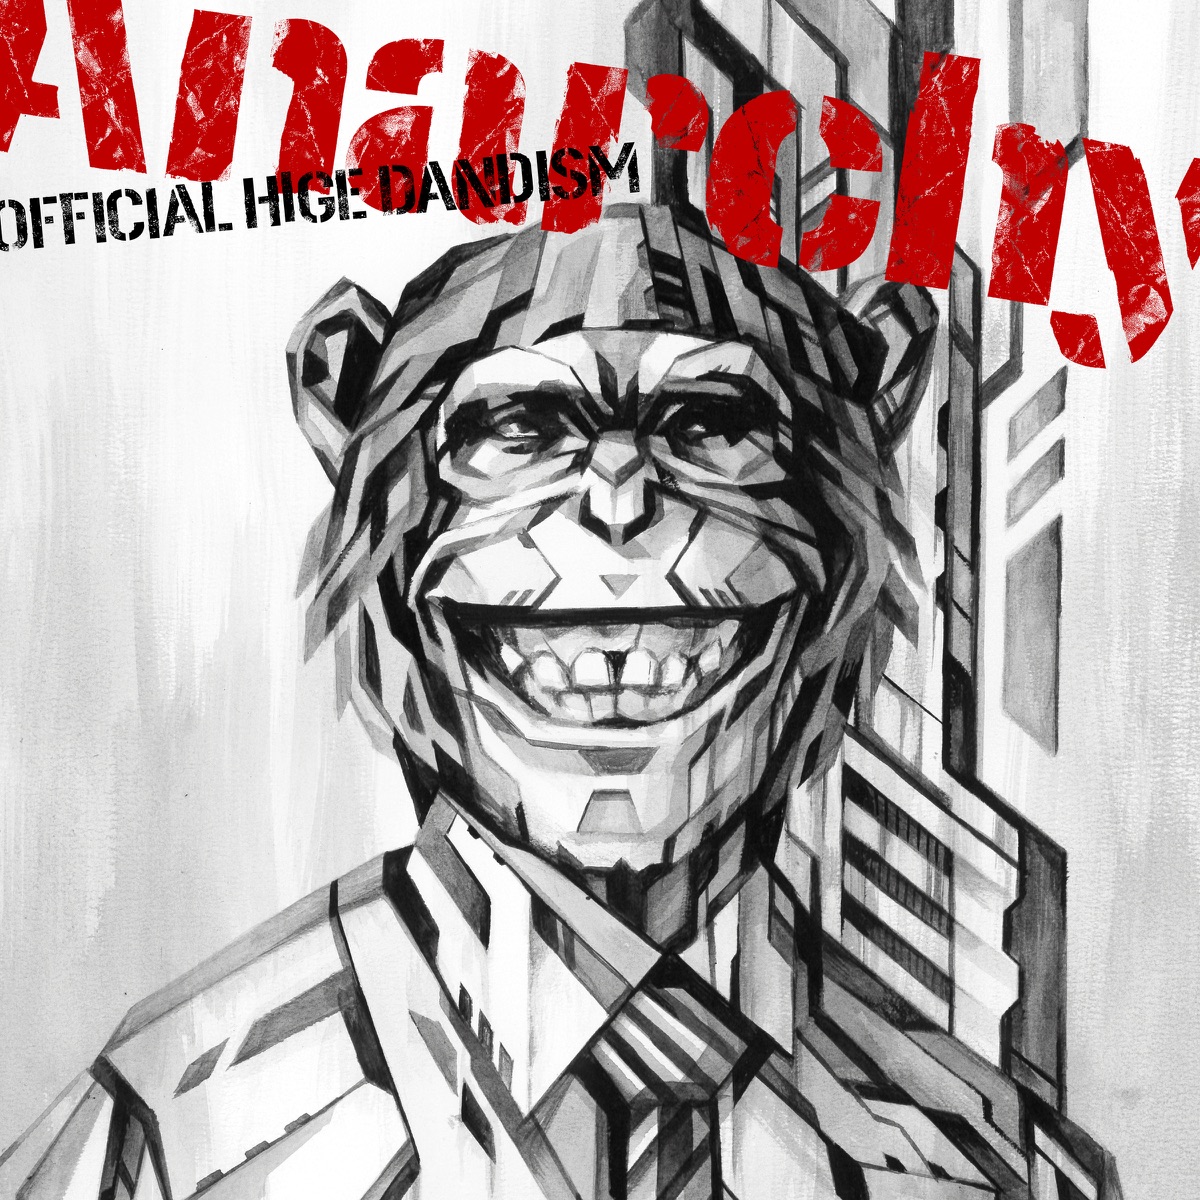 Cover art for『Official HIGE DANdism - Anarchy』from the release『Anarchy